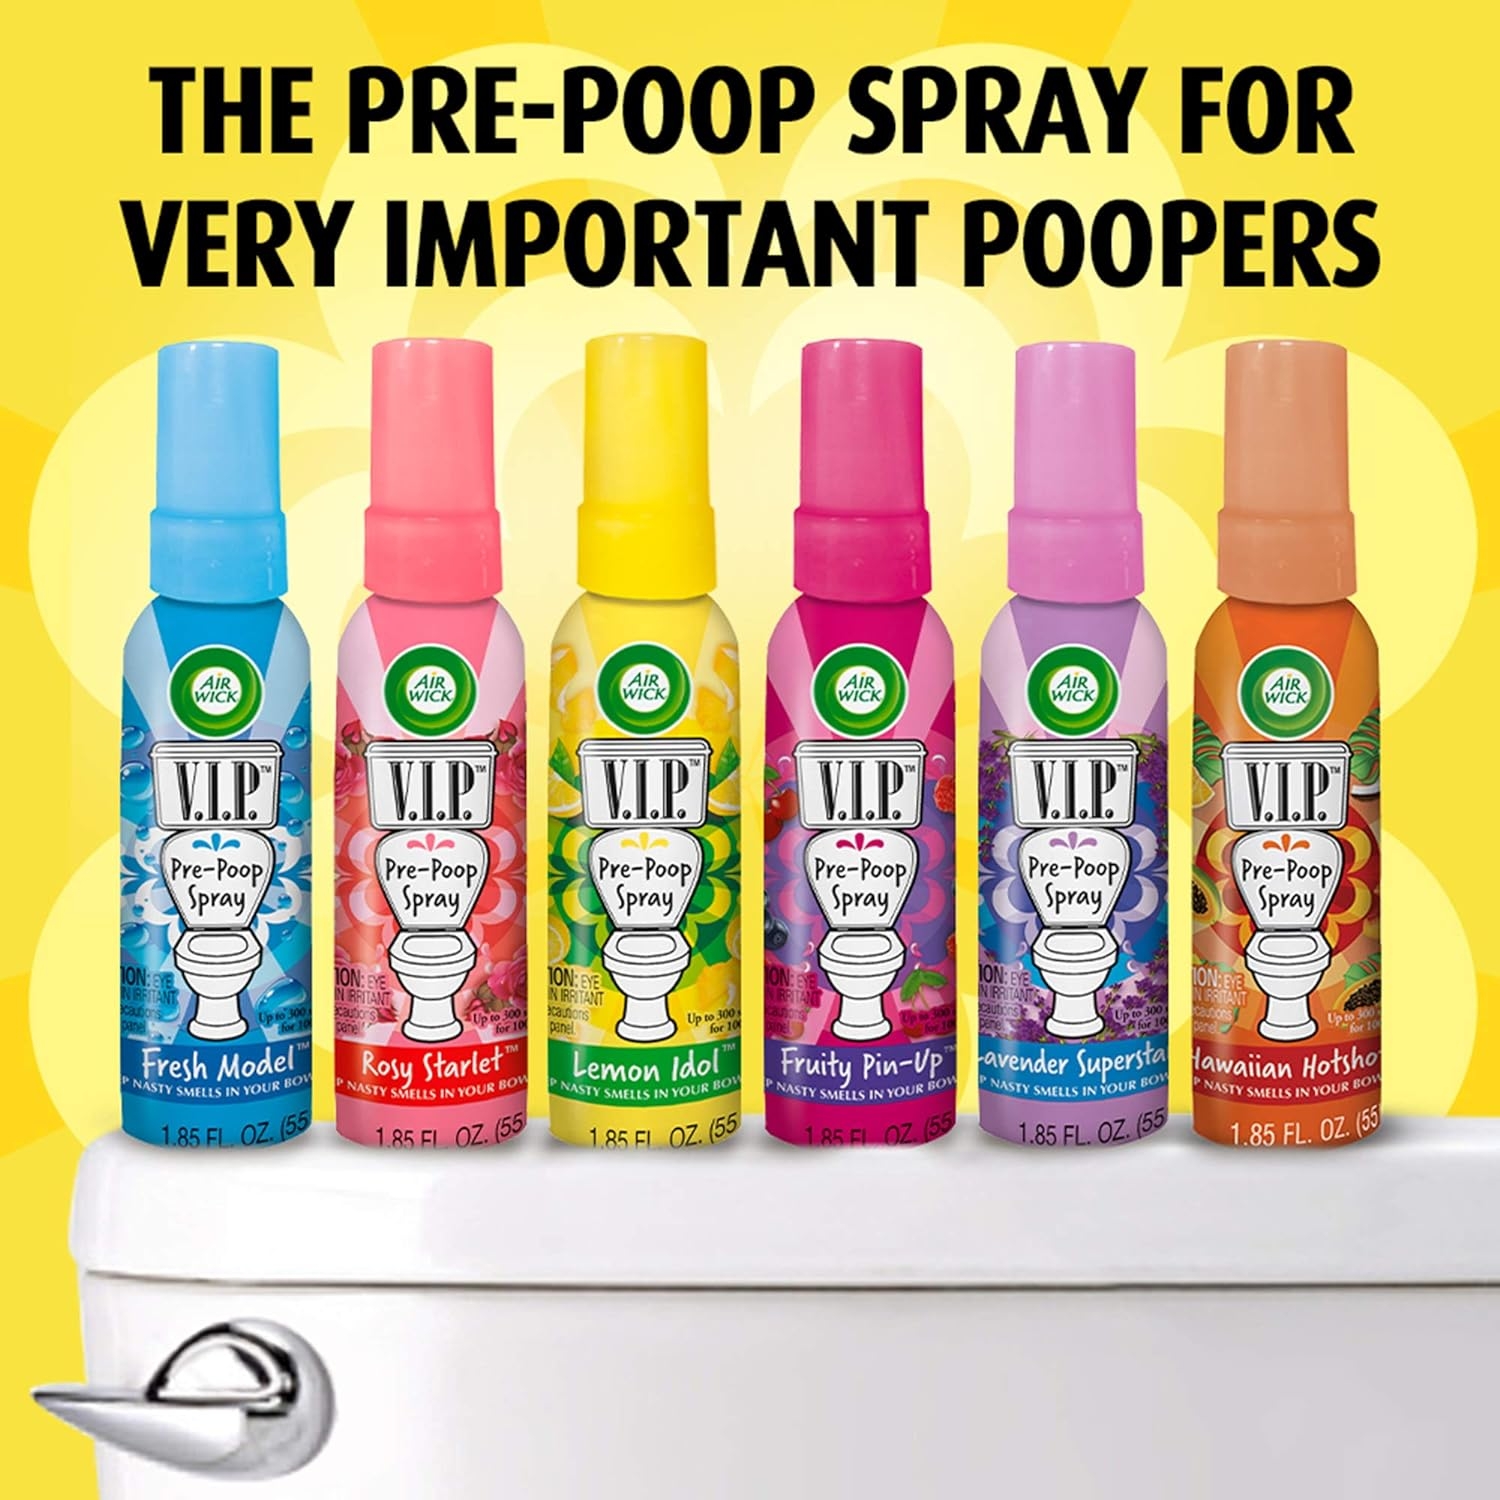 Air Wick V.I.P. Pre-Poop Toilet Spray, Up to 100 uses, Contains Essential Oils, Lavender Superstar Scent, Travel size, 1.85 oz, Holiday Gifts, White Elephant gifts, Stocking Stuffers